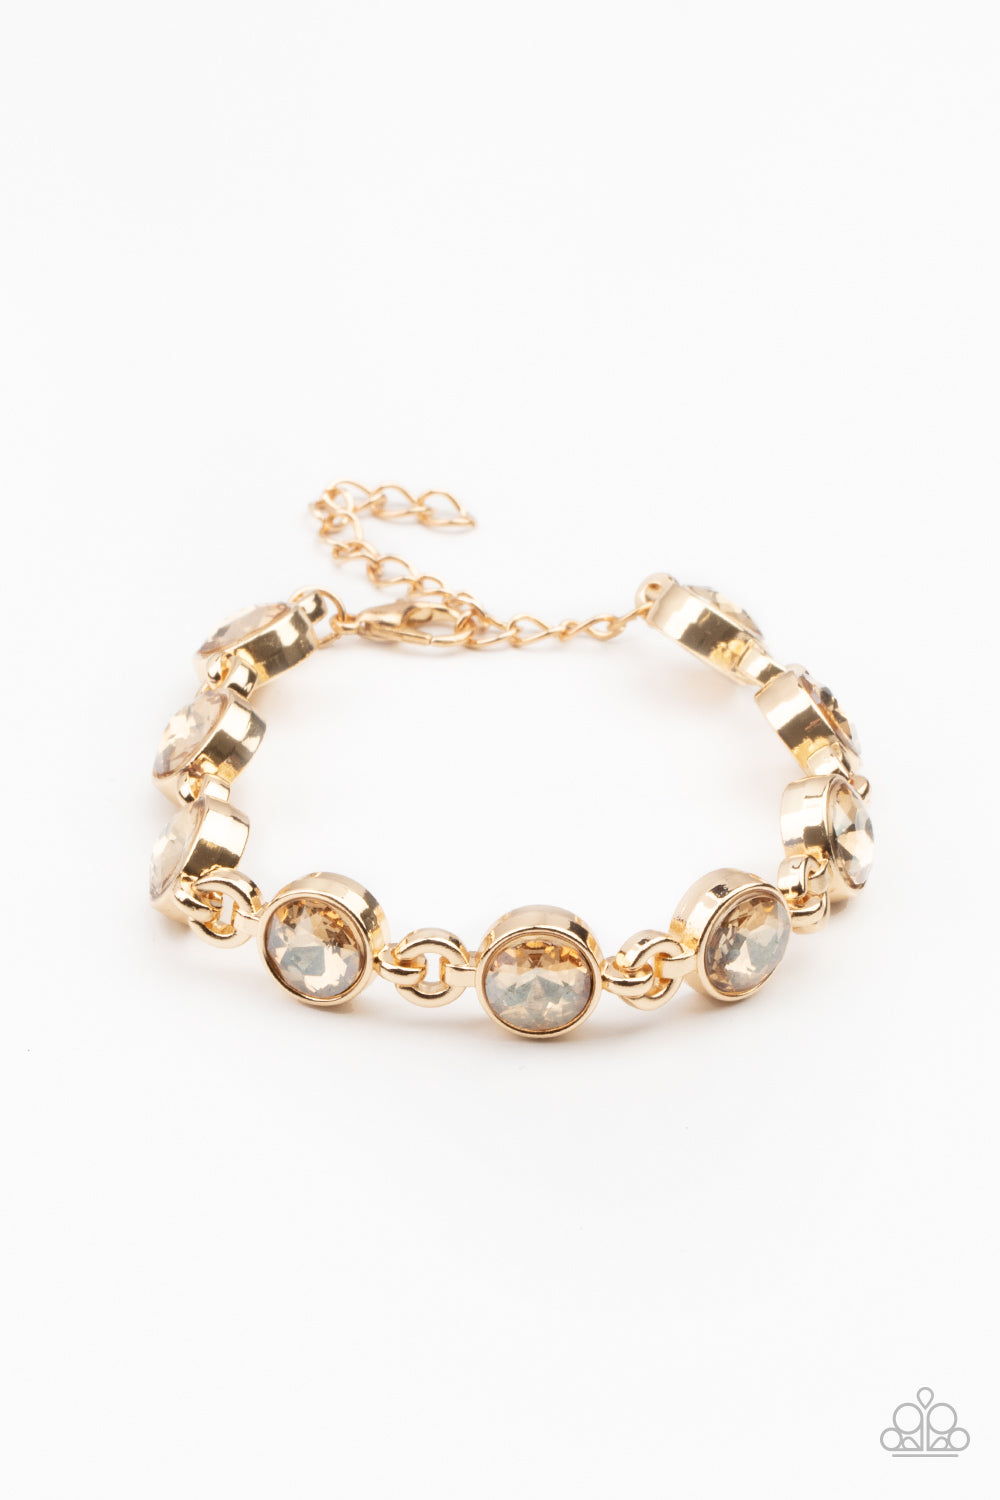 First In Fashion Show - Gold Fashion Bracelet - Paparazzi Accessories - Golden rhinestone encrusted gold frames delicately link around the wrist, creating a timeless centerpiece. Features an adjustable clasp closure. Sold as one individual bracelet.